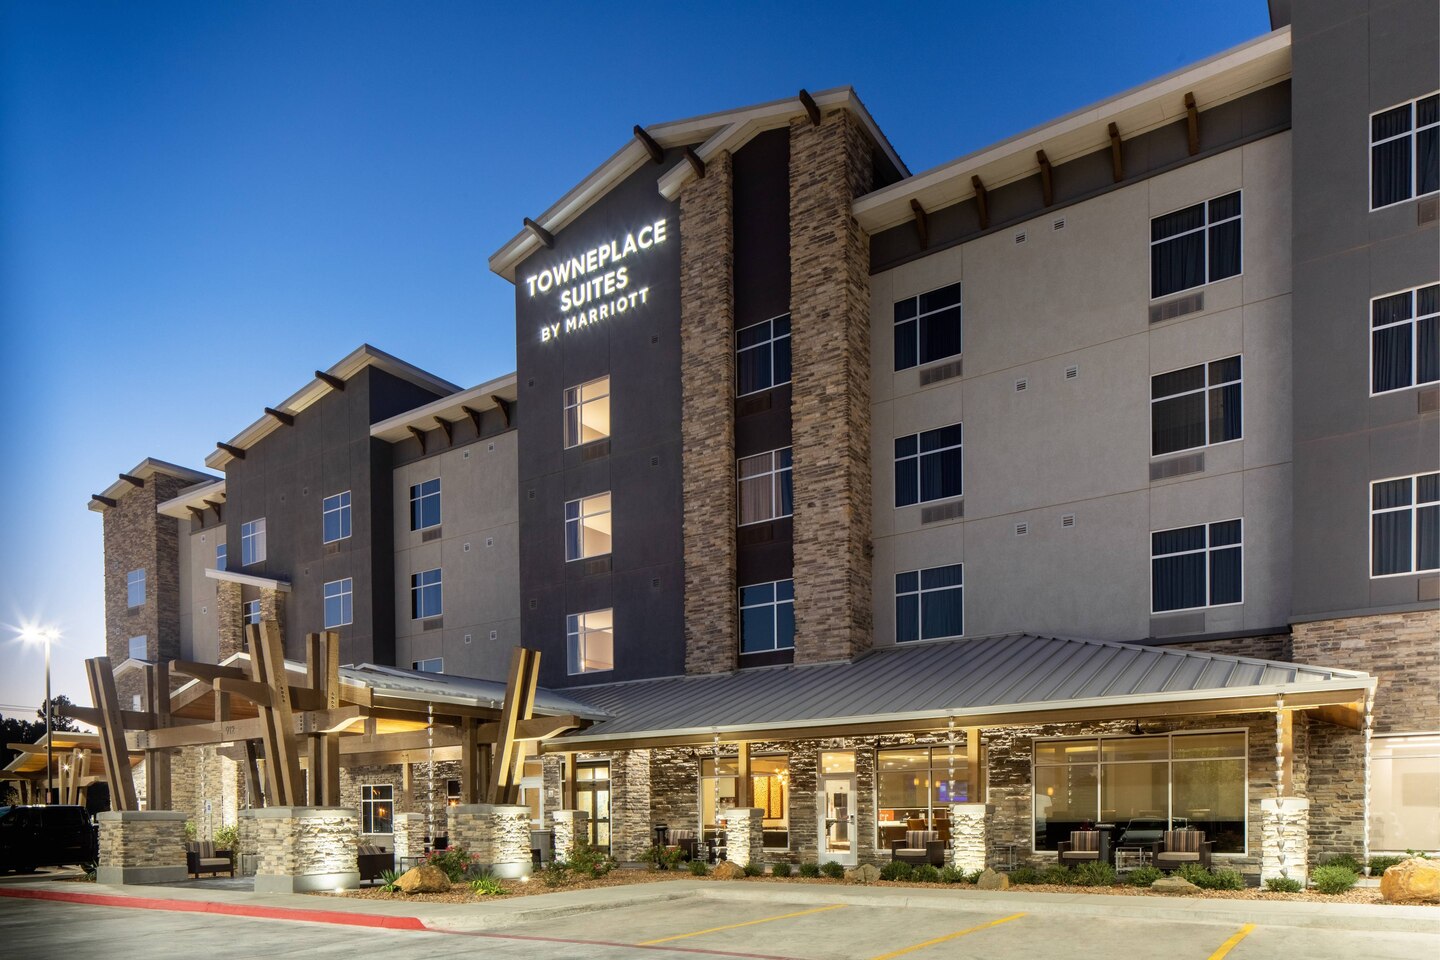 TownePlace Suites by Marriott South image